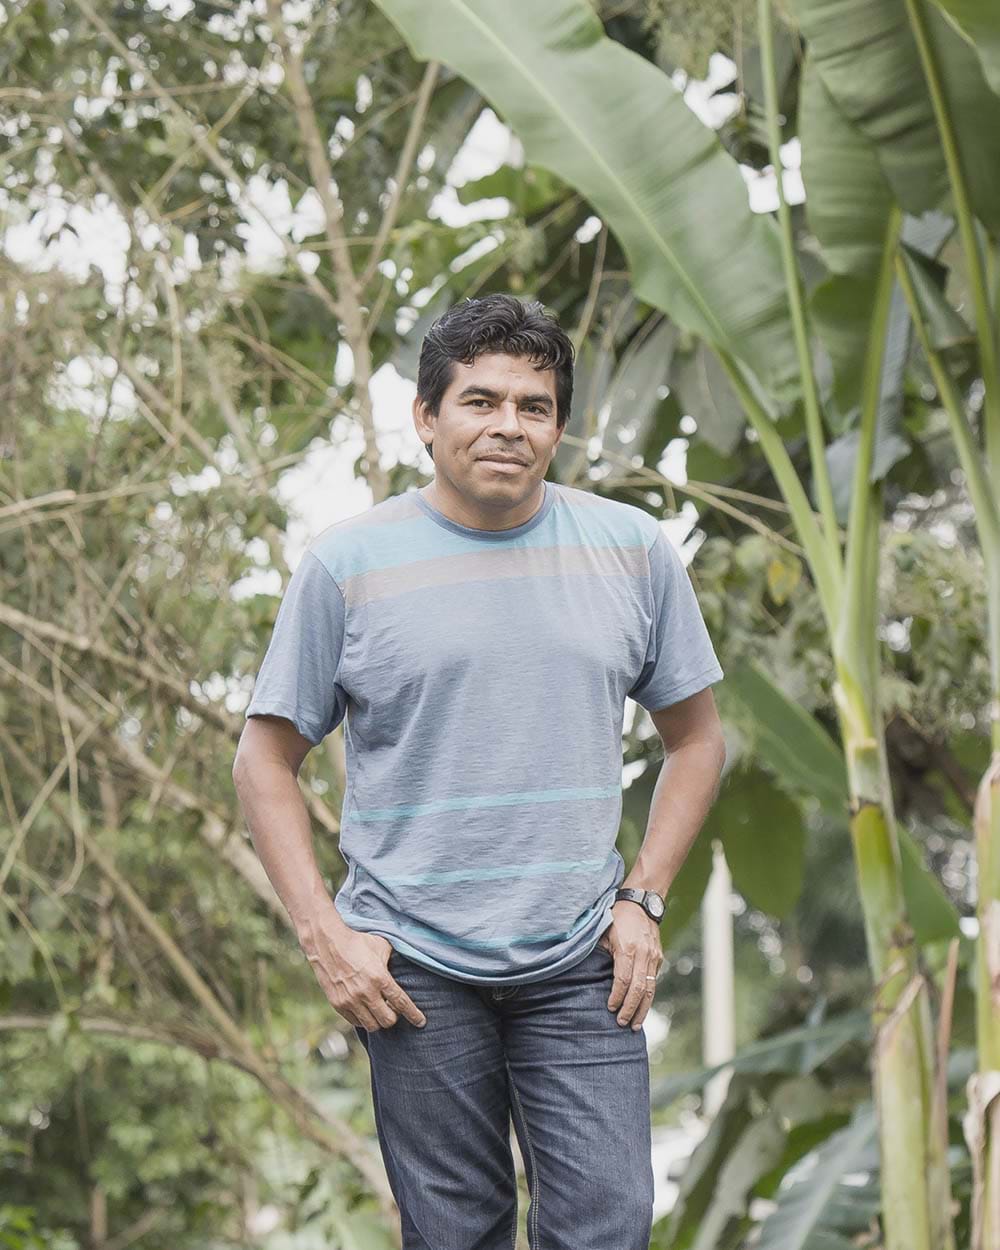 An indigenous man with short black hair standing in front of banana trees wearing a blue t-shirt and blue jeans.